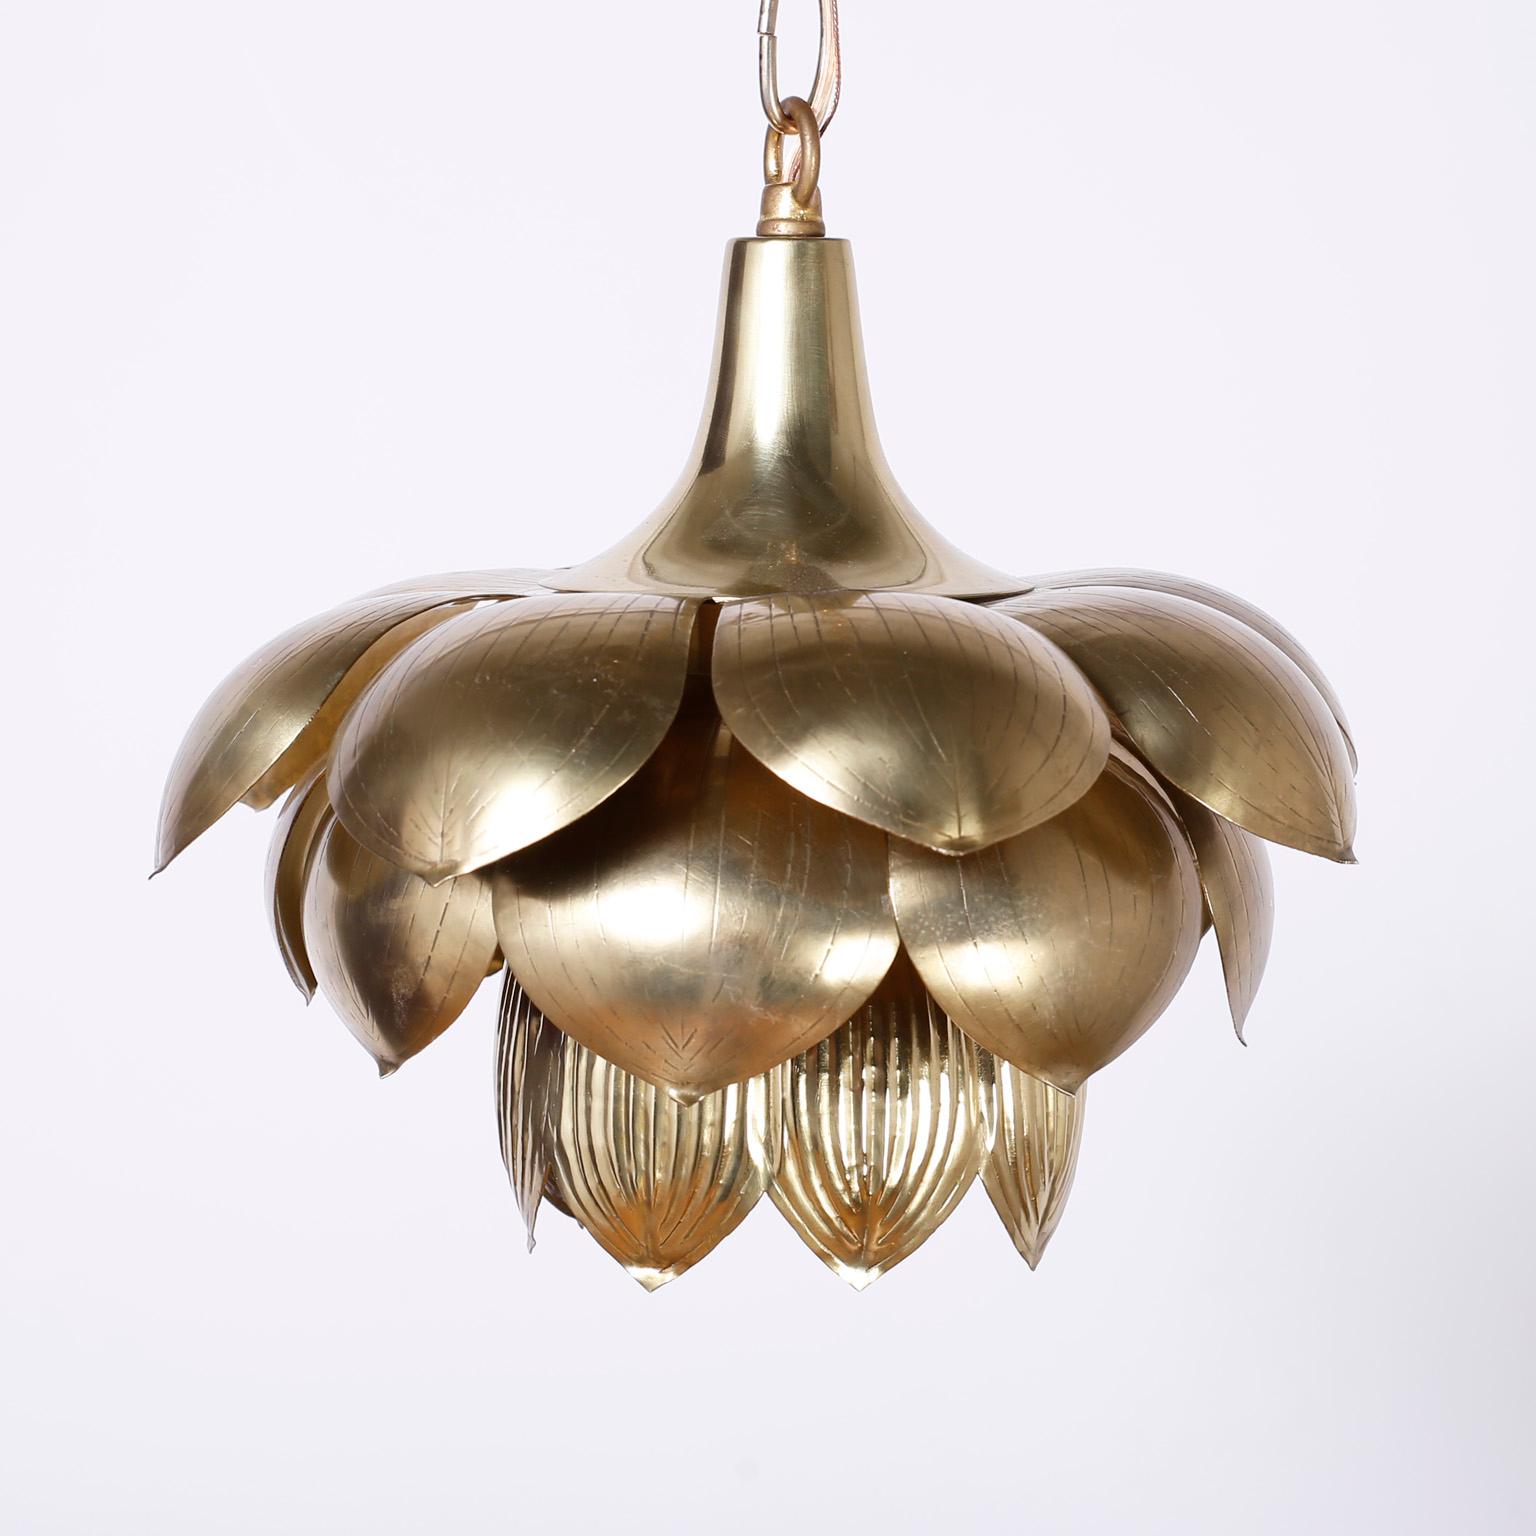 Chic set of three mid century lotus pendants with an exotic ambiance, crafted in brass and hand polished and lacquered for easy care. Priced individually.